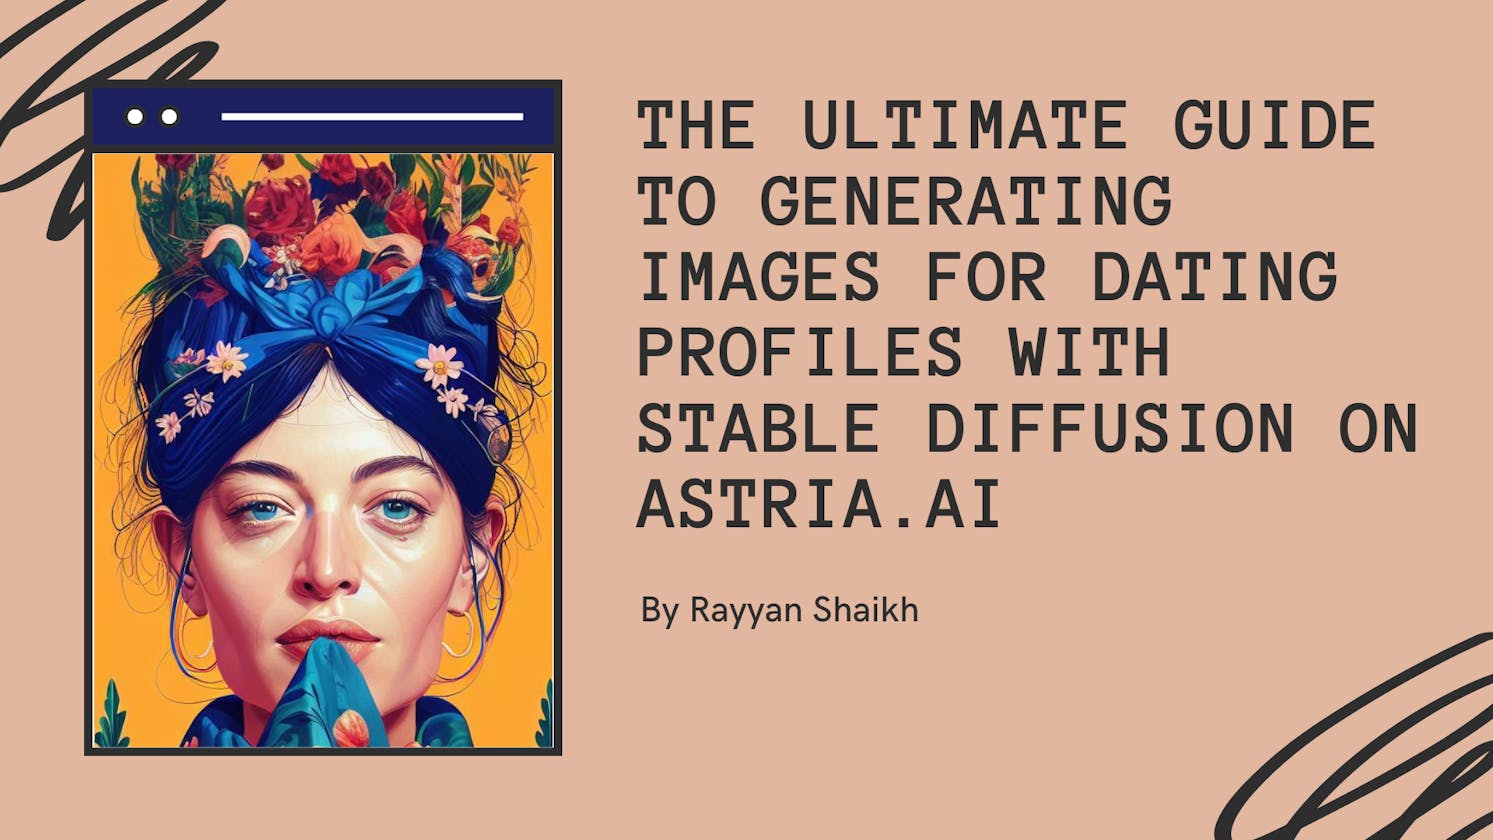 The Ultimate Guide to Generating Images for Dating Profiles with Stable Diffusion on Astria.ai